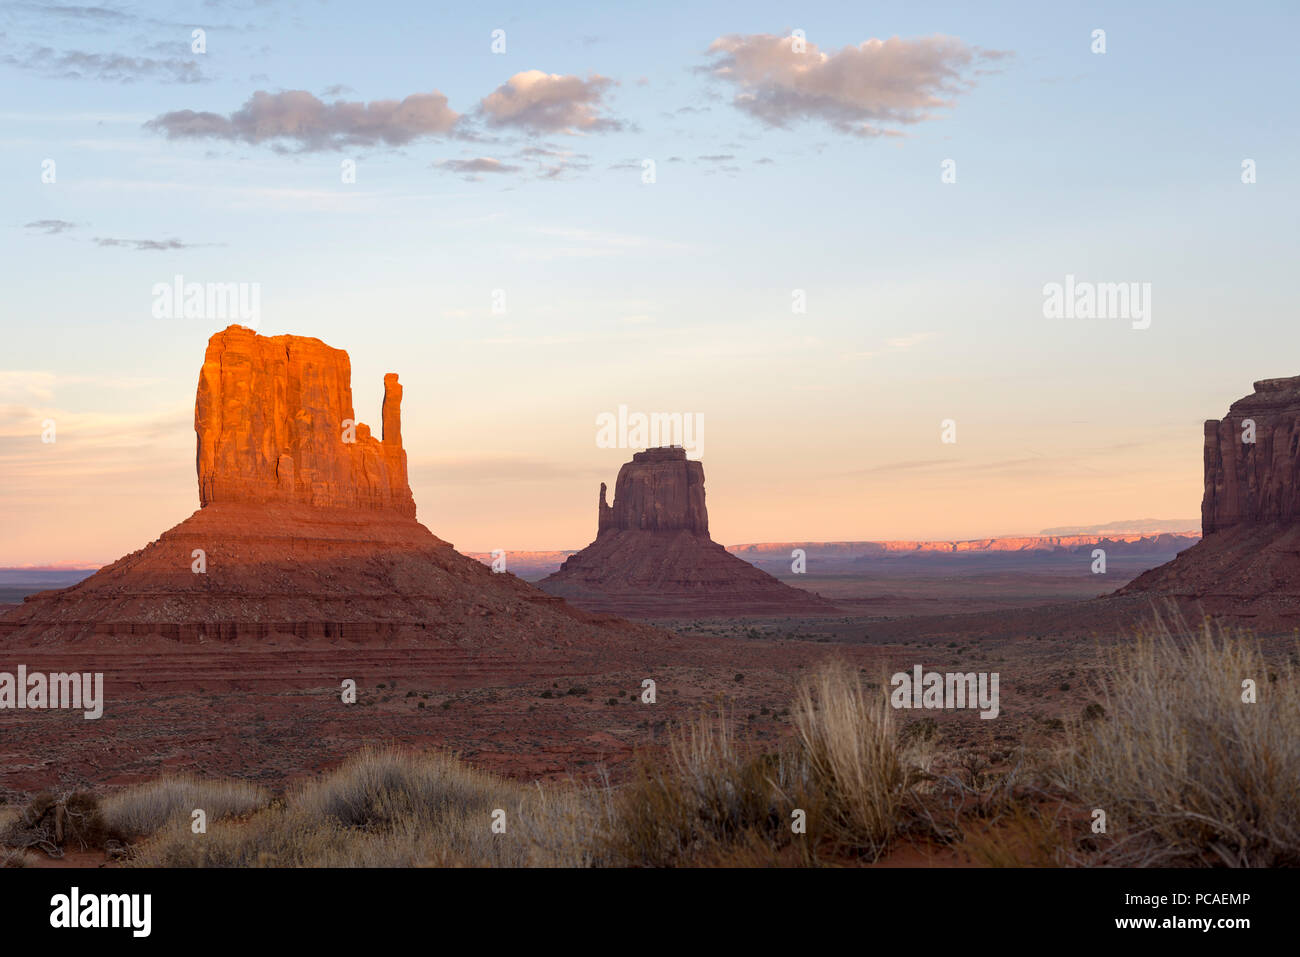 The giant sandstone buttes glowing pink at sunset in Monument Valley Navajo Tribal Park on the Arizona-Utah border, USA, North America Stock Photo